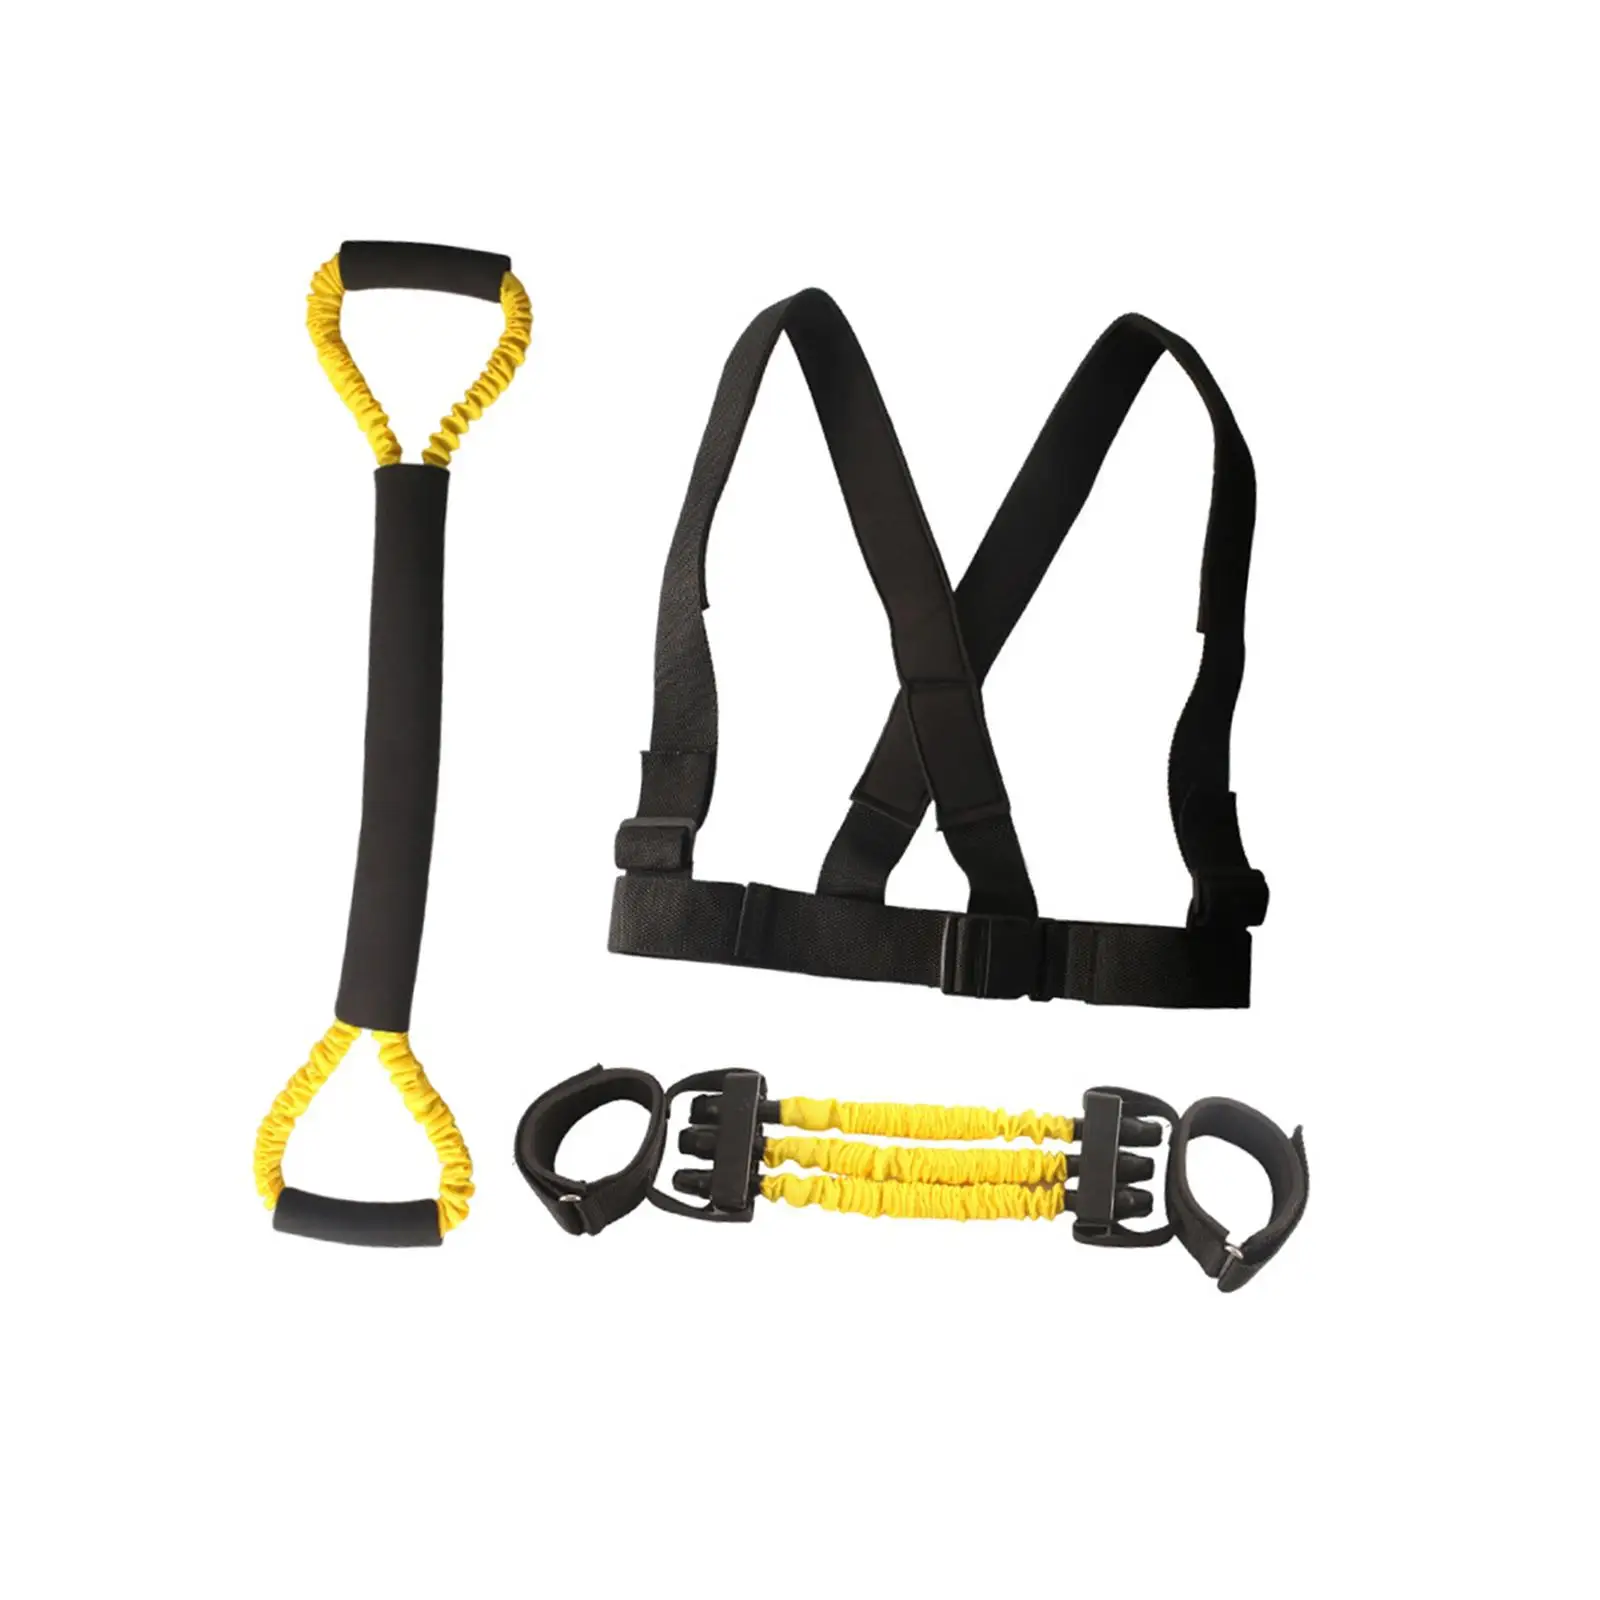 Boxing Resistance Bands Karate Trainer Workout Pulling Rope Exercise Band for Shadow Boxing Muscle Building Women Men